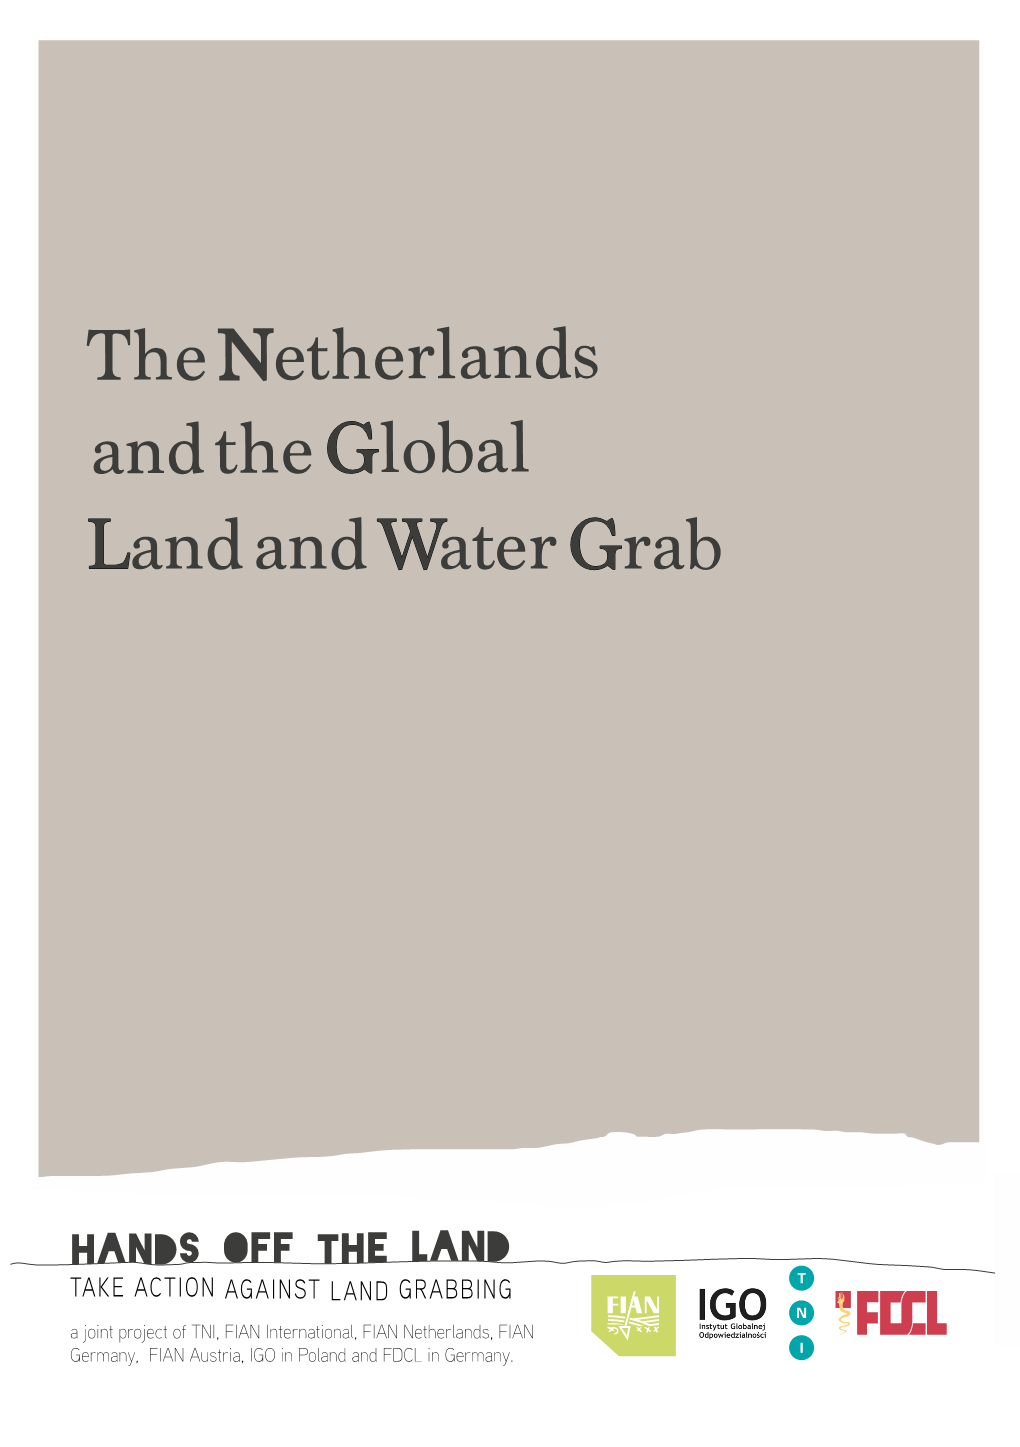 The Netherlands and the Global Land and Water Grab